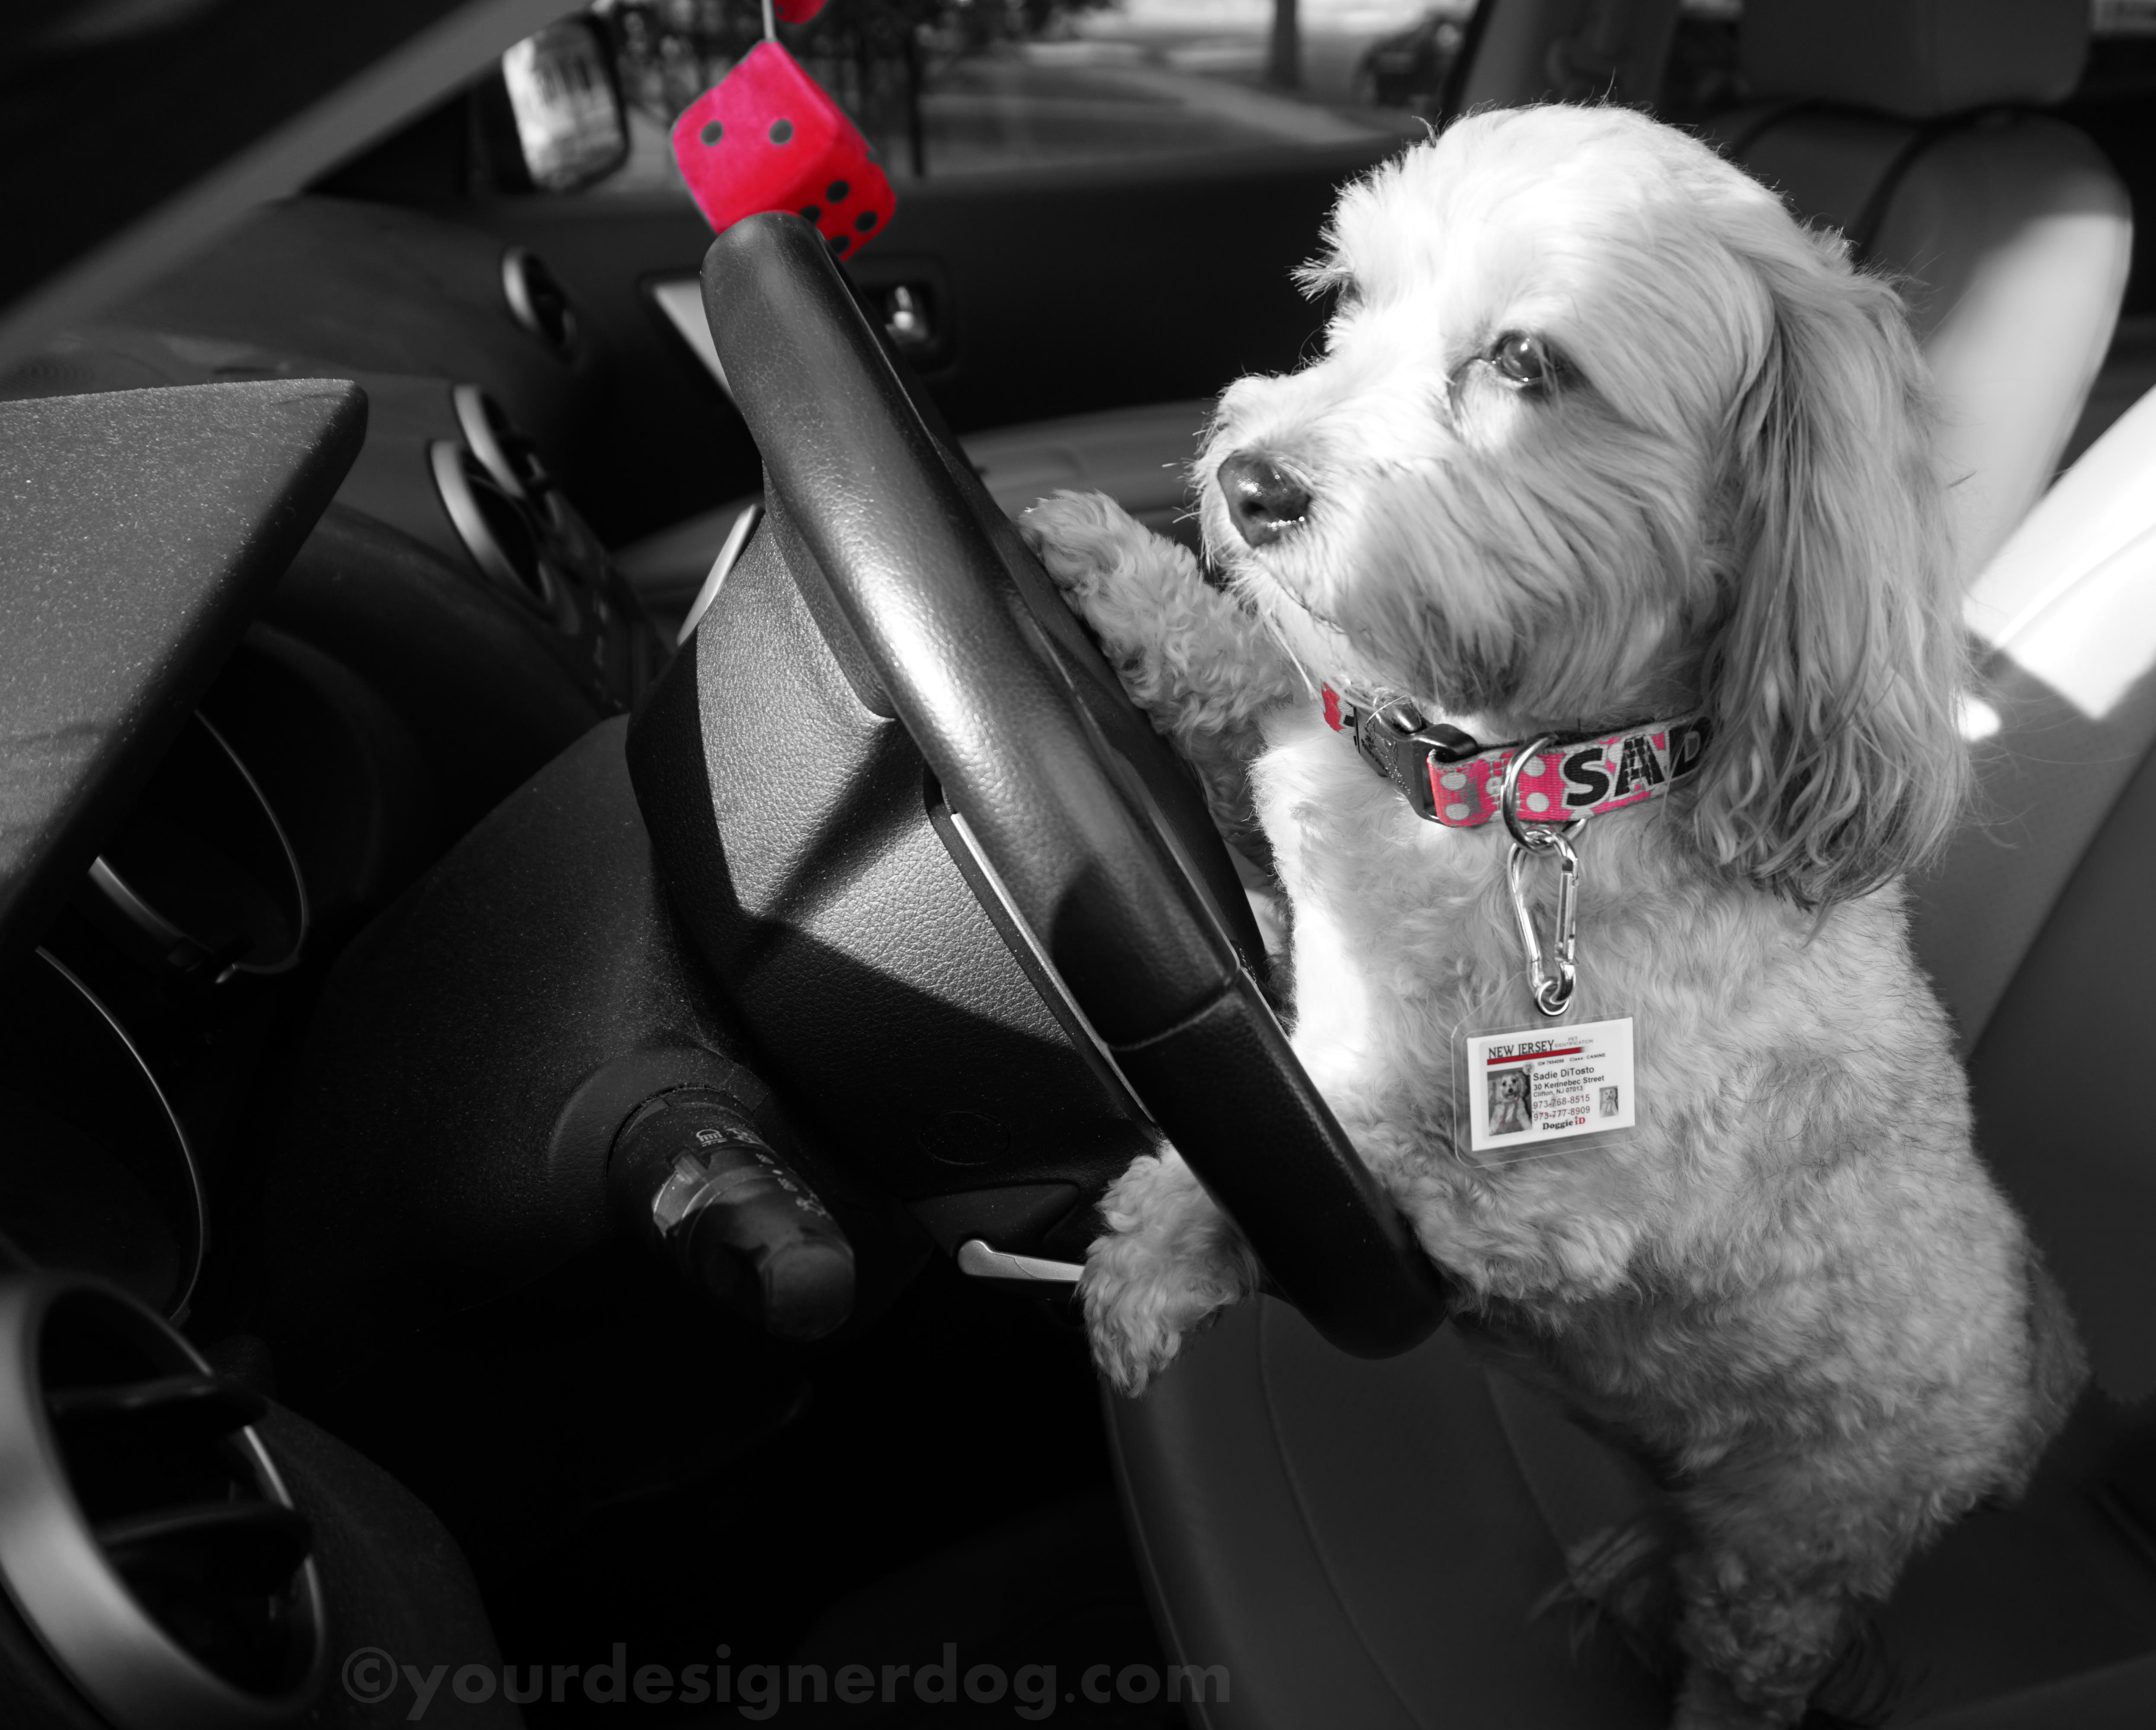 dogs, designer dogs, yorkipoo, yorkie poo, dog id tag, black and white photography, driver's license